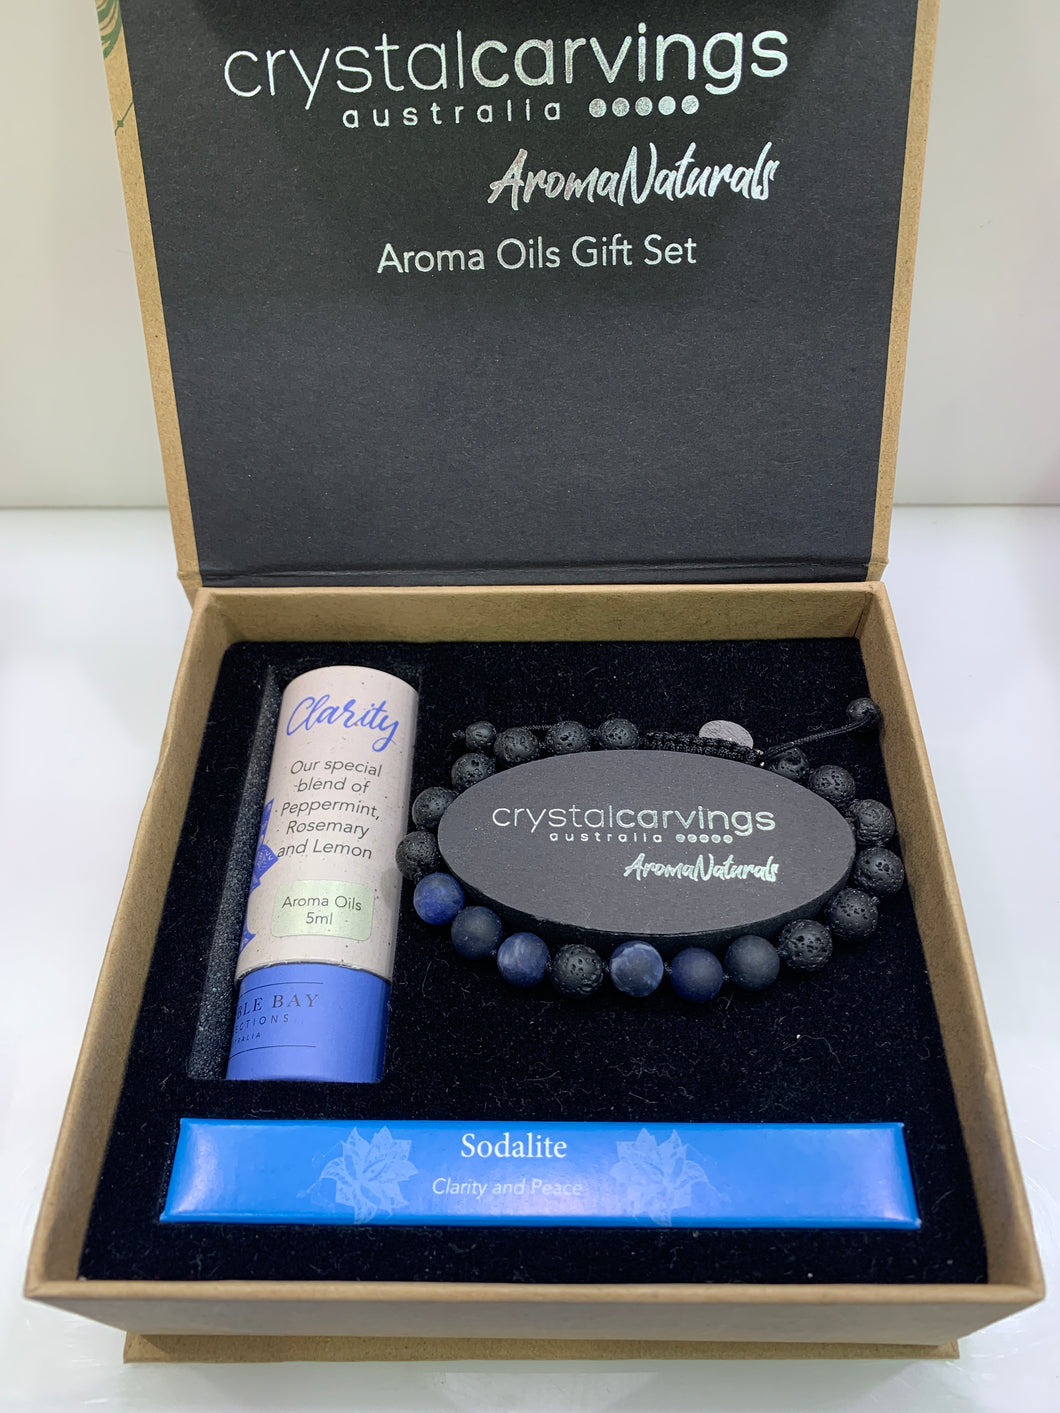 Crystal Carvings Australia Aroma Naturals Aroma Oils Gift Set - Sodalite (Clarity and Peace)